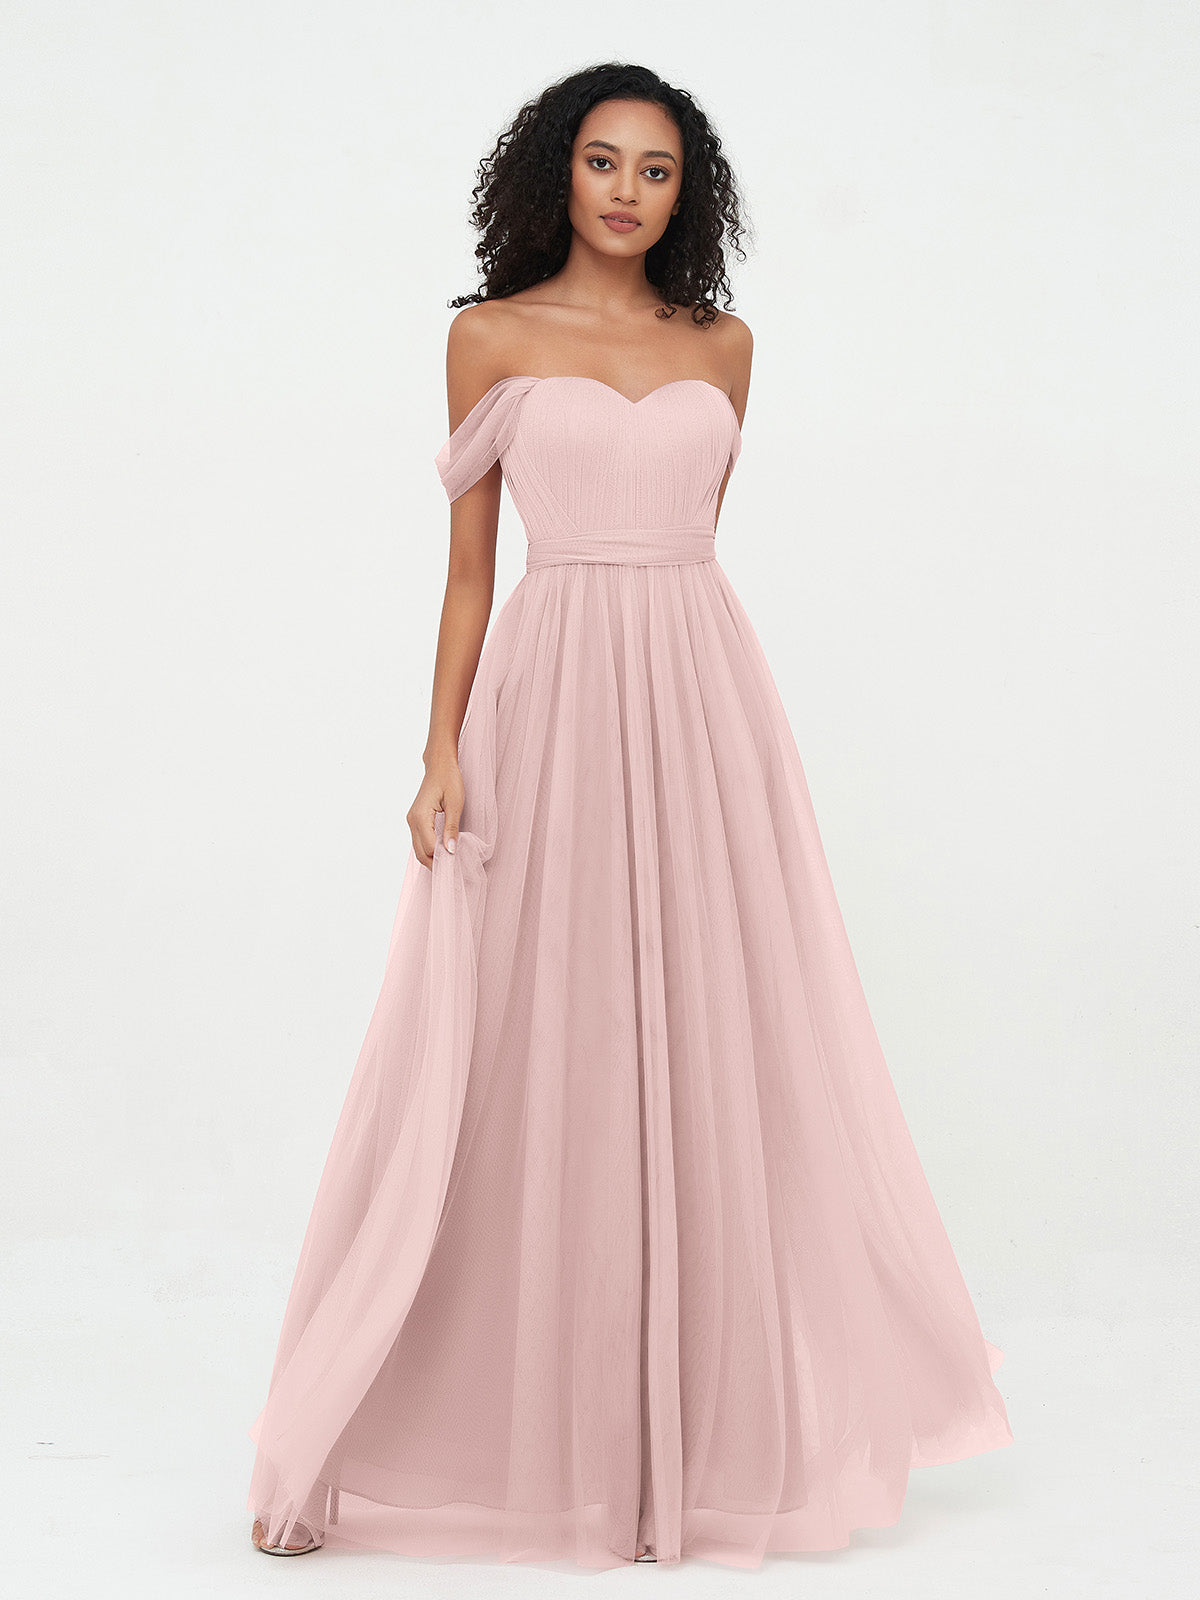 Princess Off Shoulder Tulle Dresses with Sash Bow-Dusty Rose